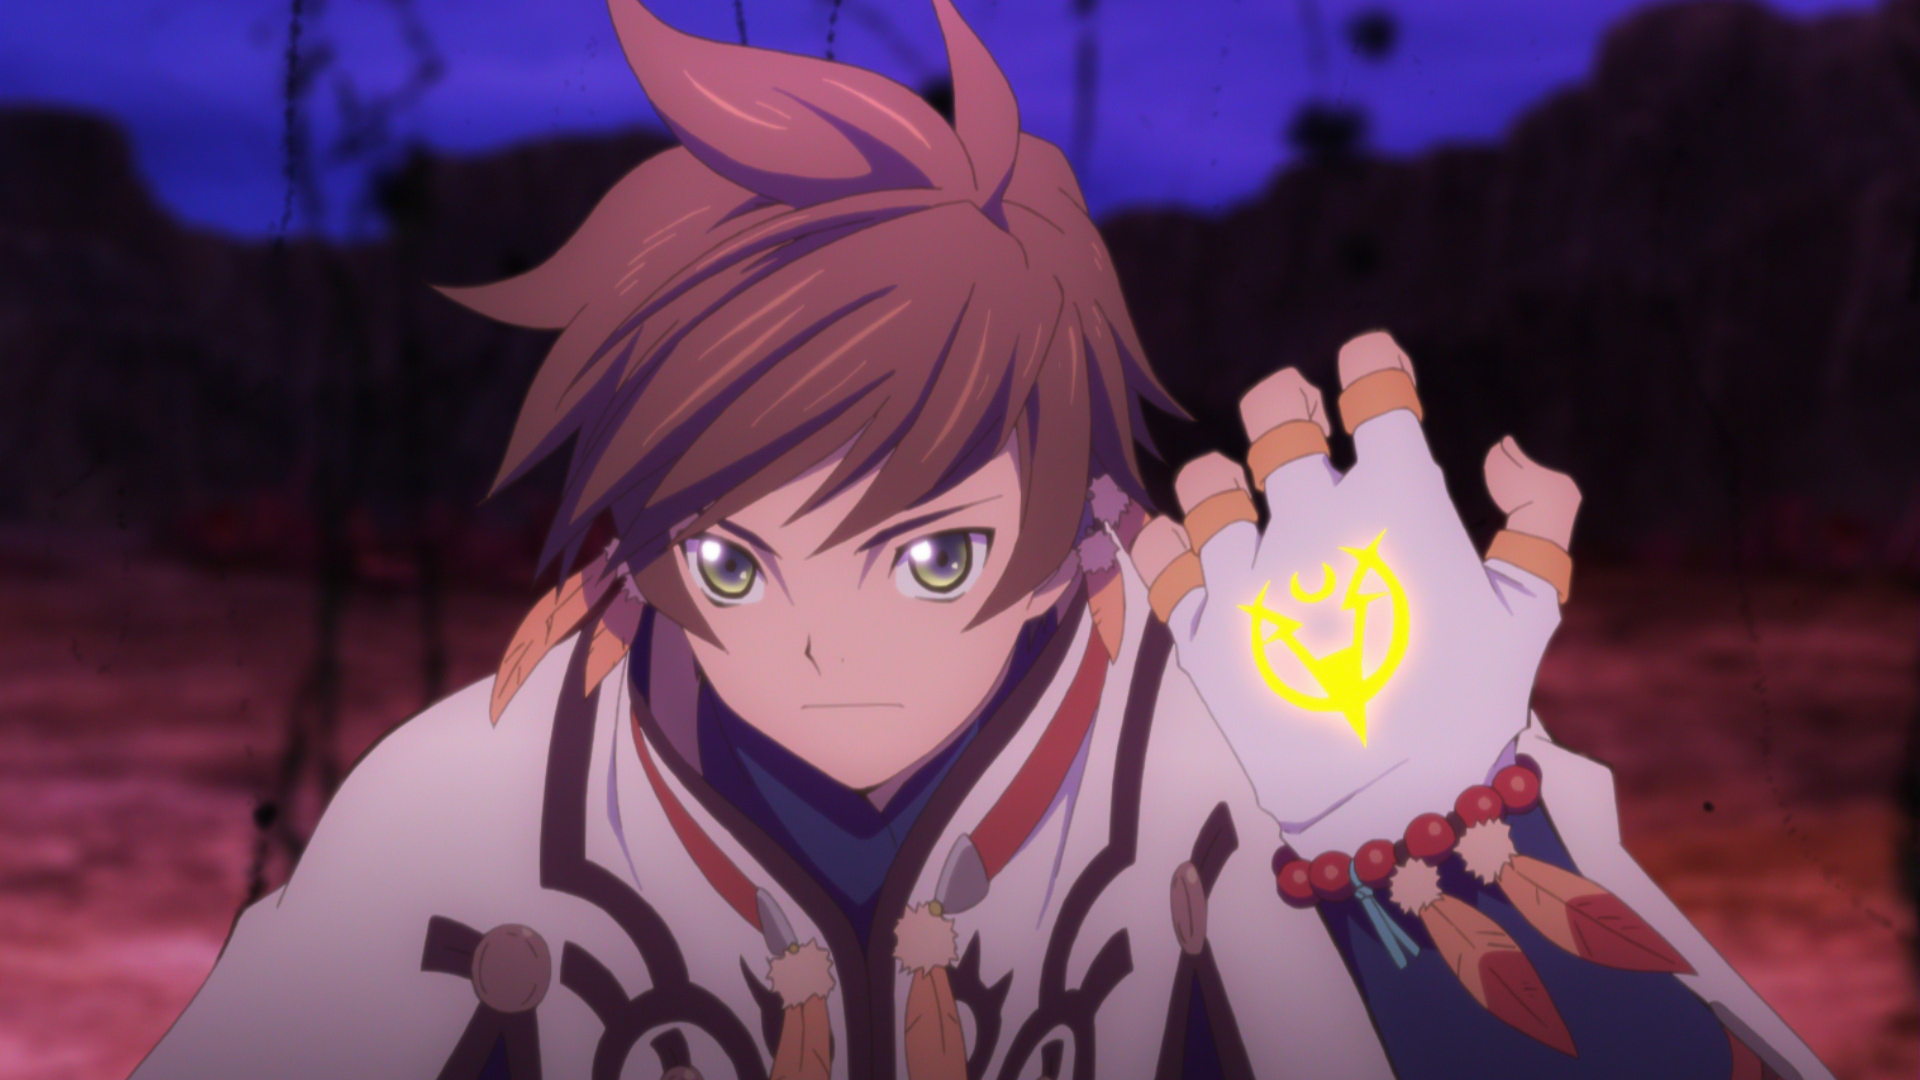 New Tales of Zestiria Trailers Show Off Costume DLC